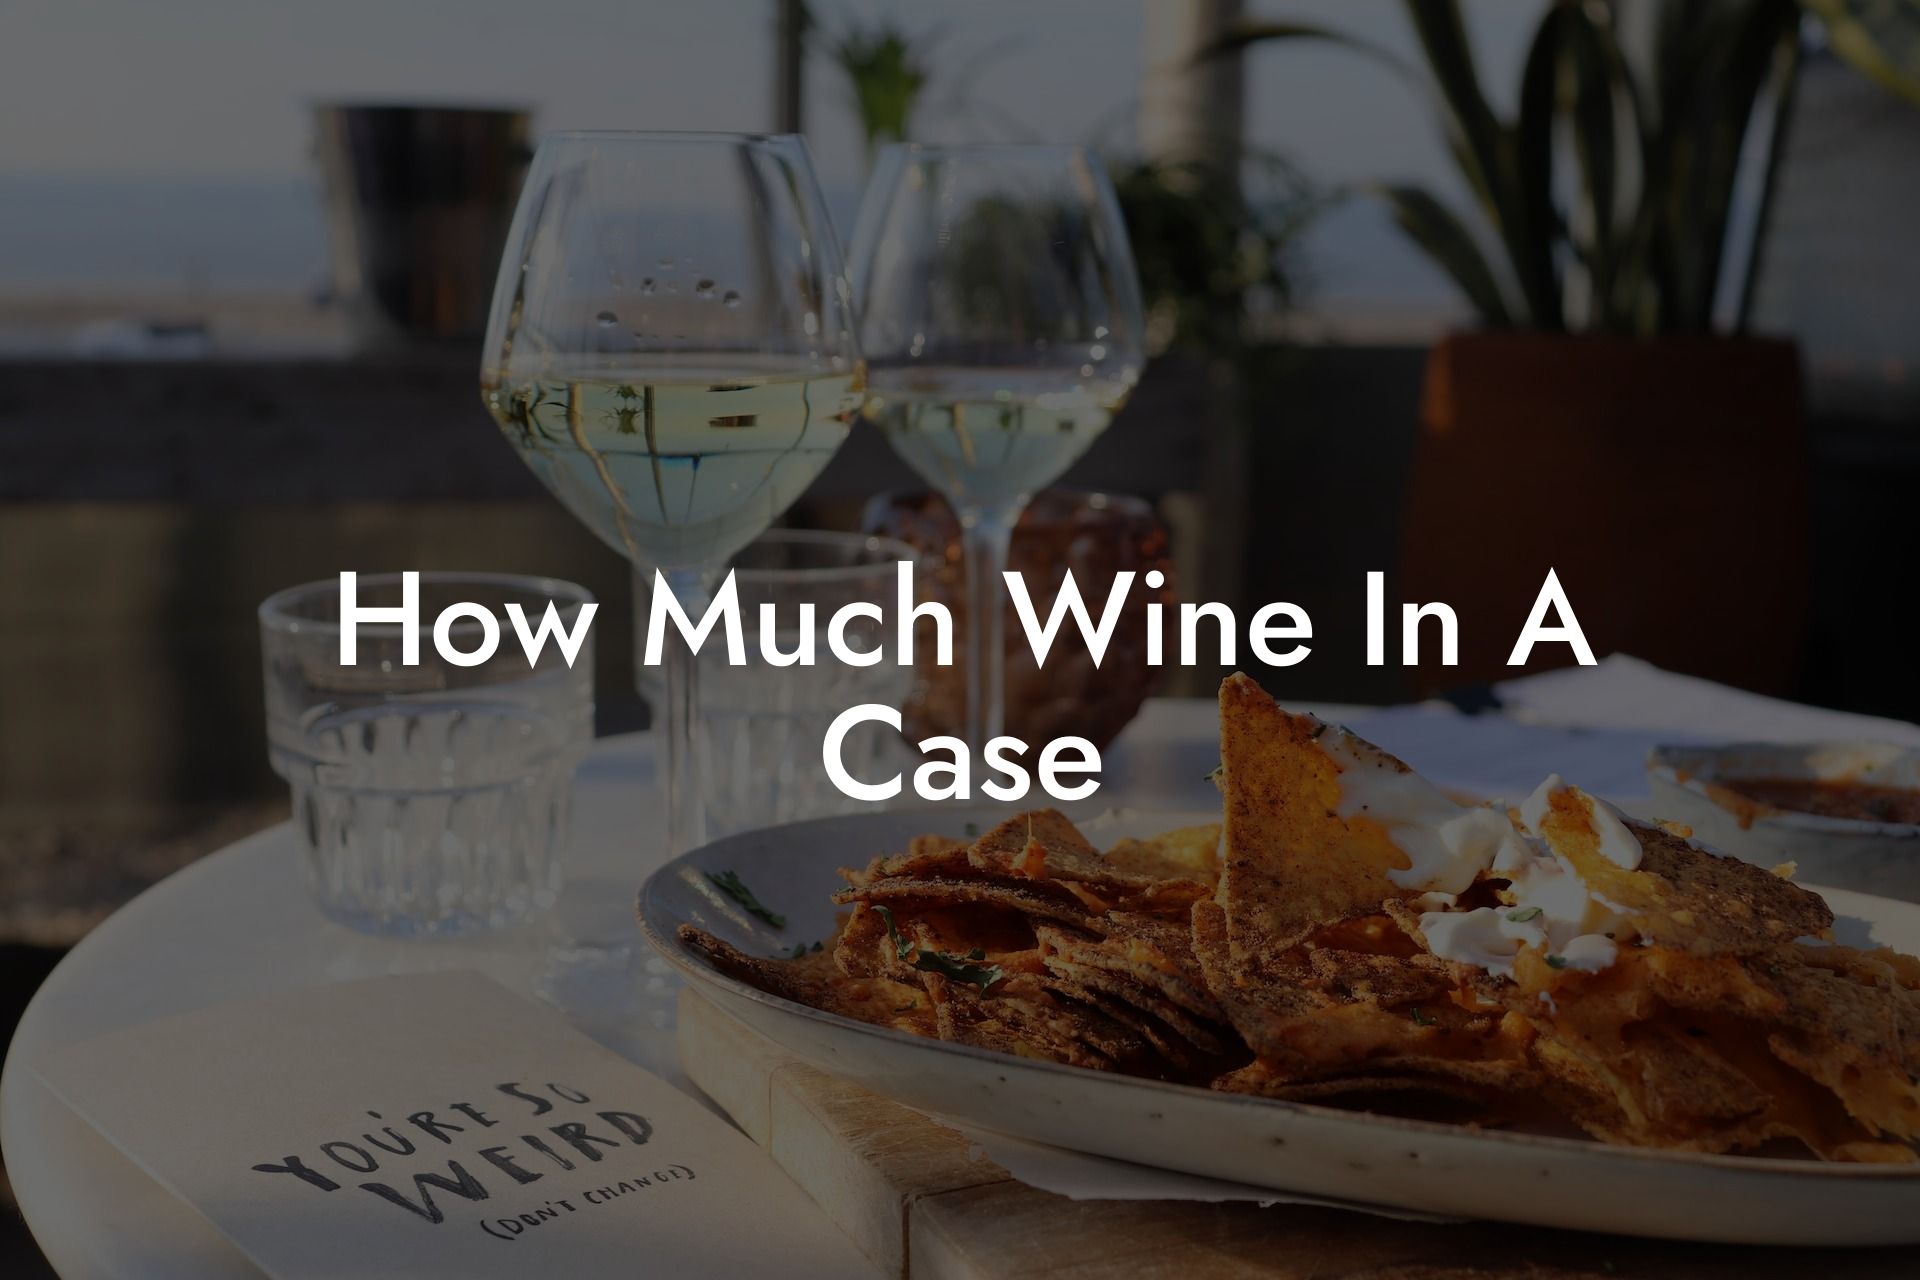 How Much Wine In A Case